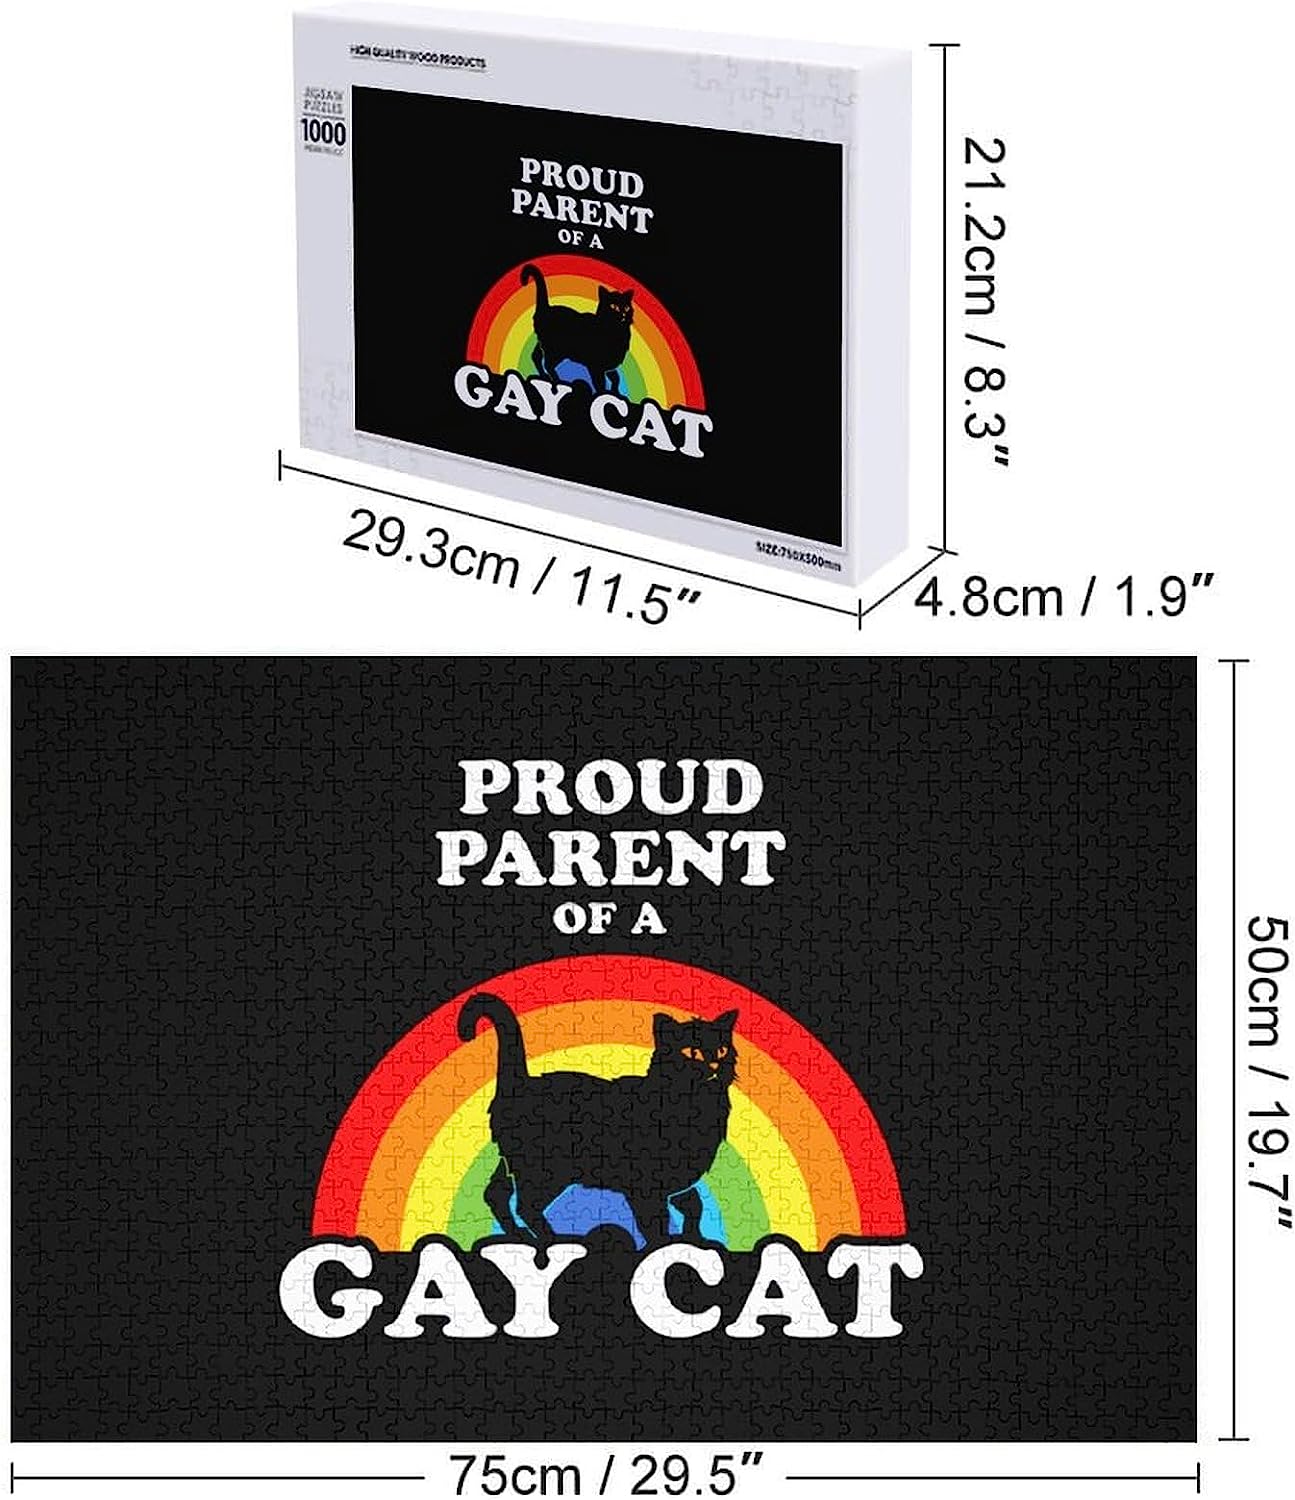 Proud Parent of A Gay Cat Puzzles for Adults Wooden Jigsaw Puzzle Funny Leisure Toy Gifts for Family Friends